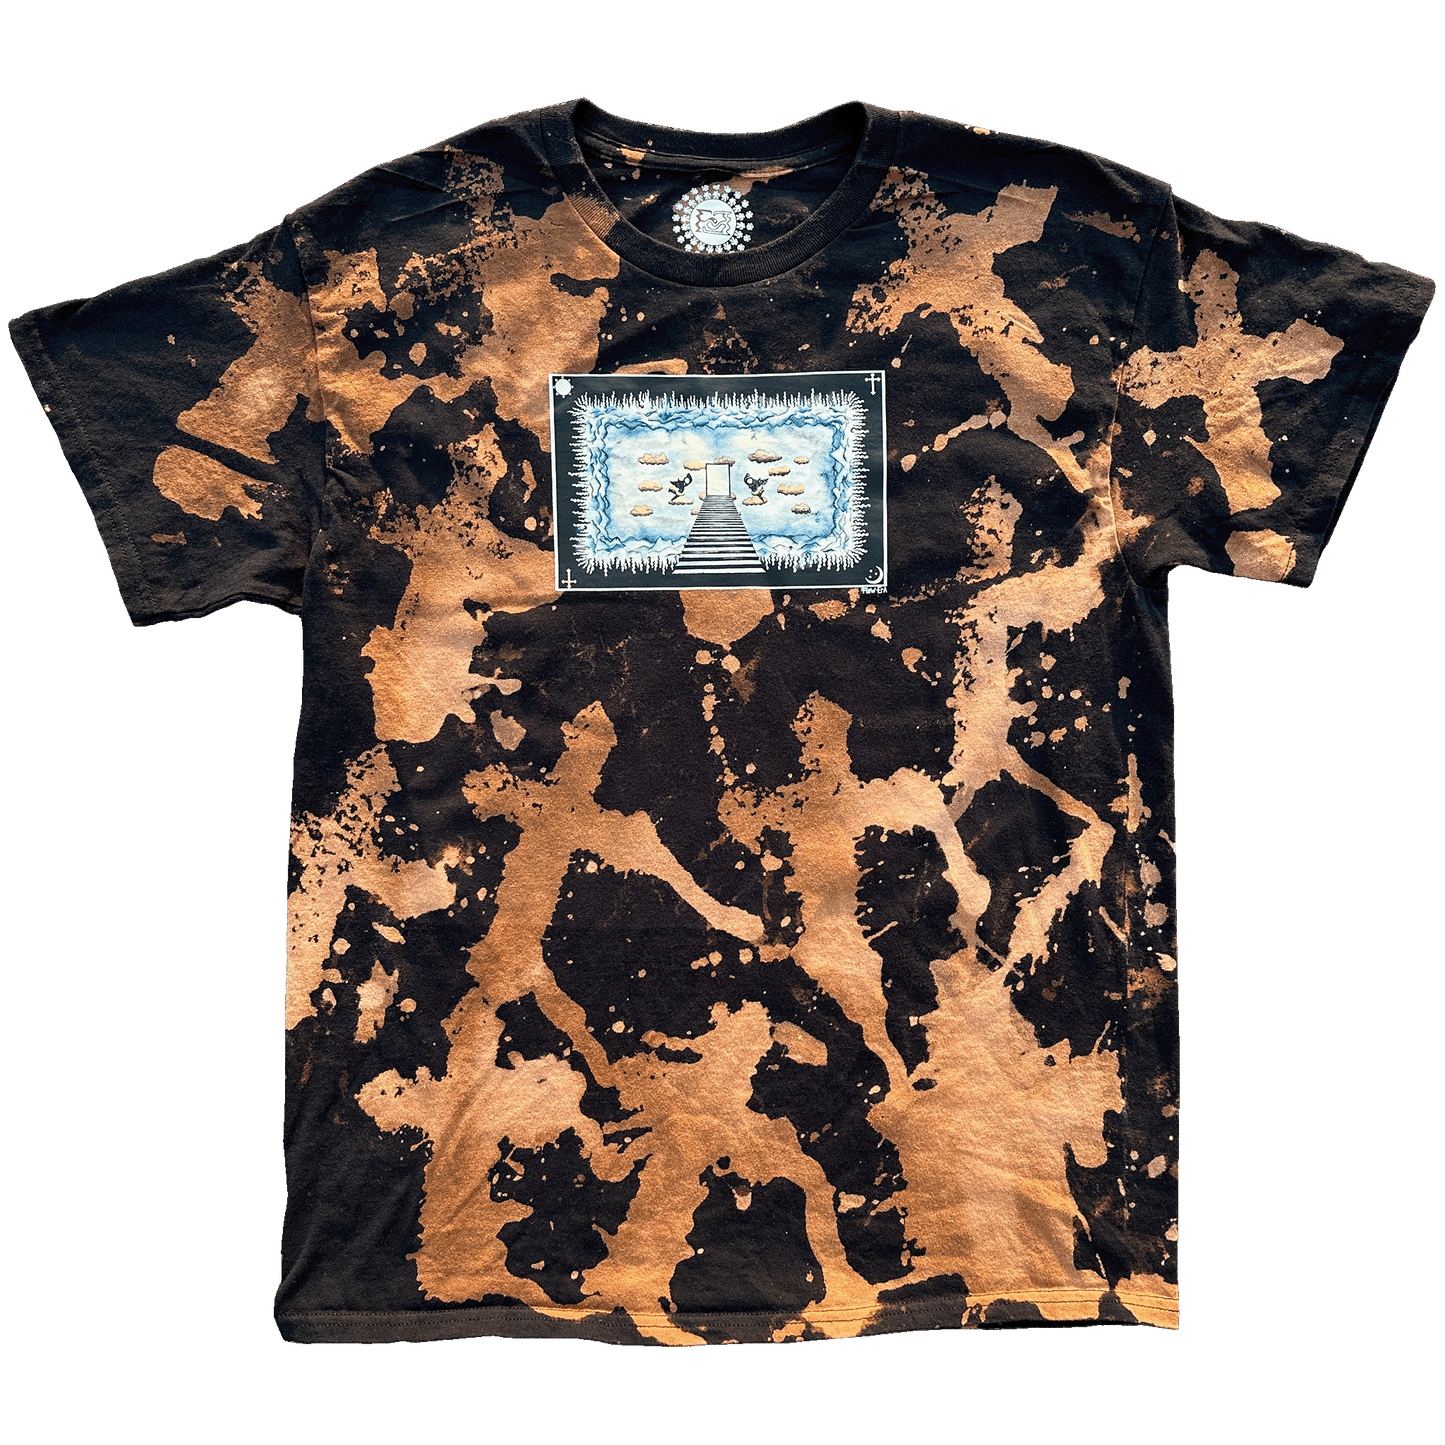 "Out of the Darkness and Into the Light" Sponge Bleached Shirt